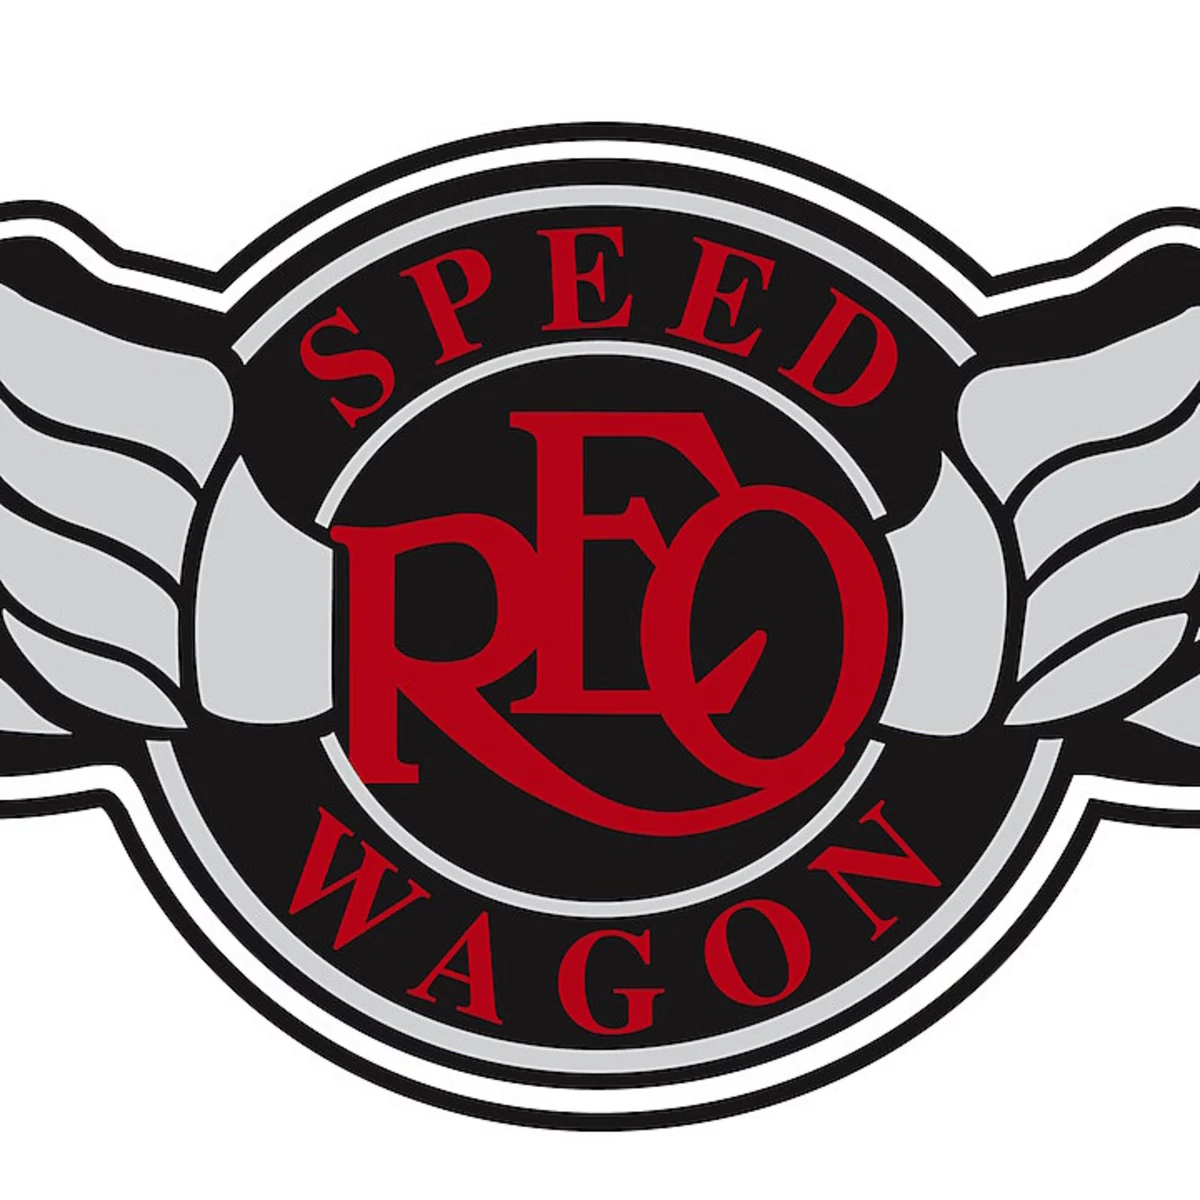 New REO Speedwagon Date Announced